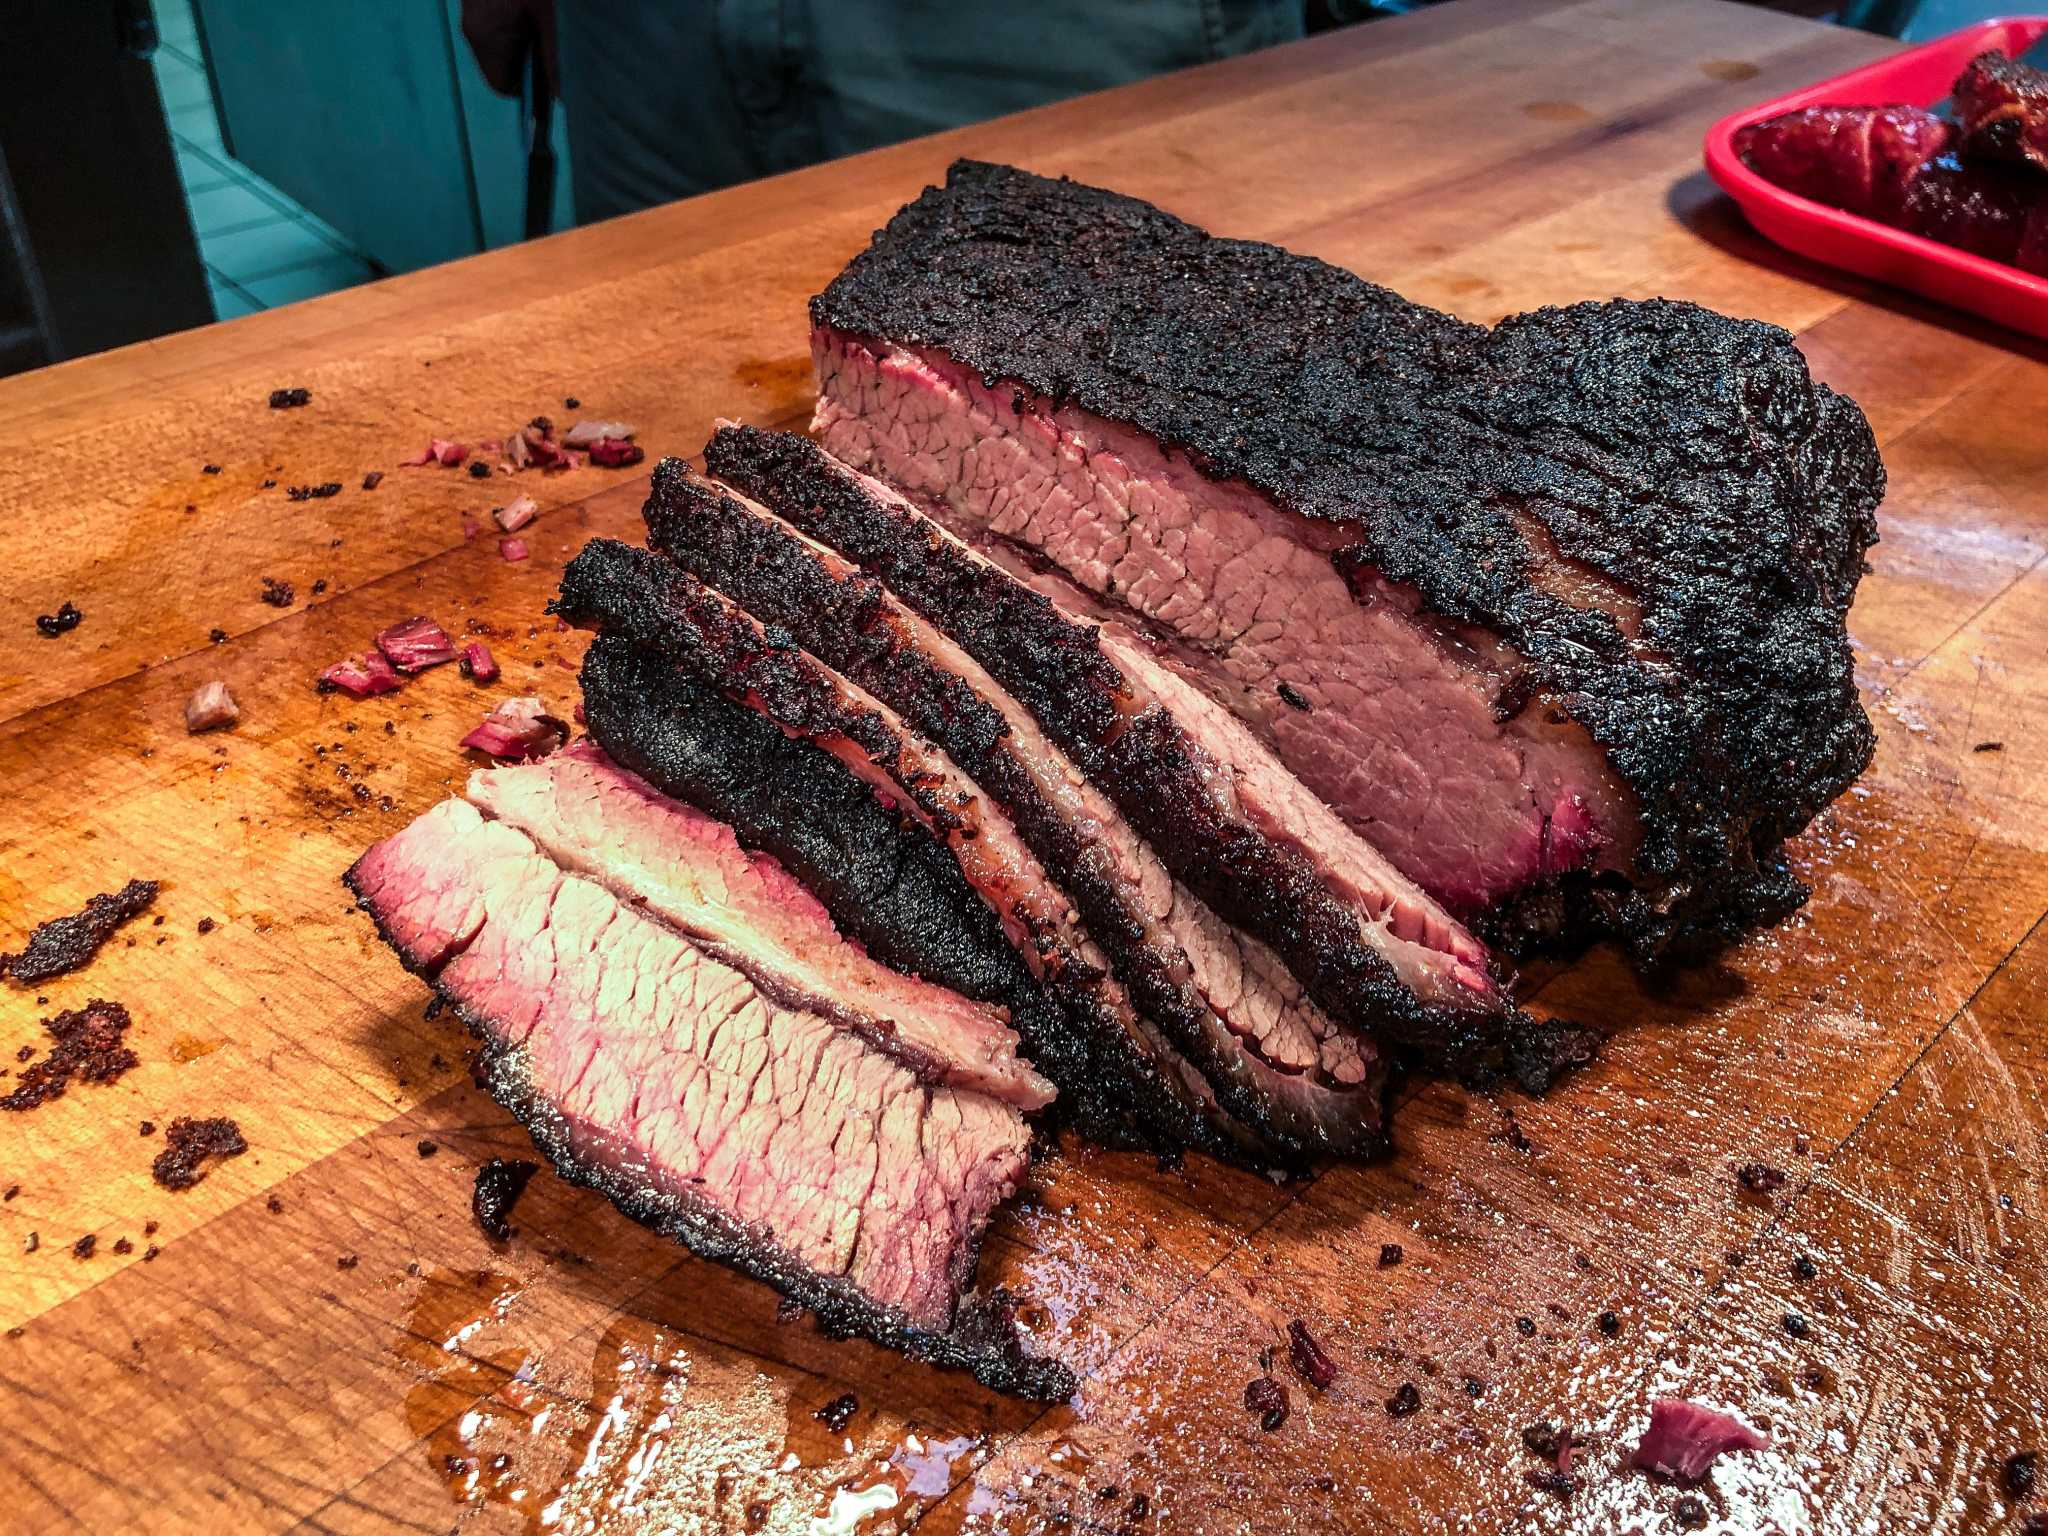 Why Does Barbecue Get That Red 'Smoke Ring?'